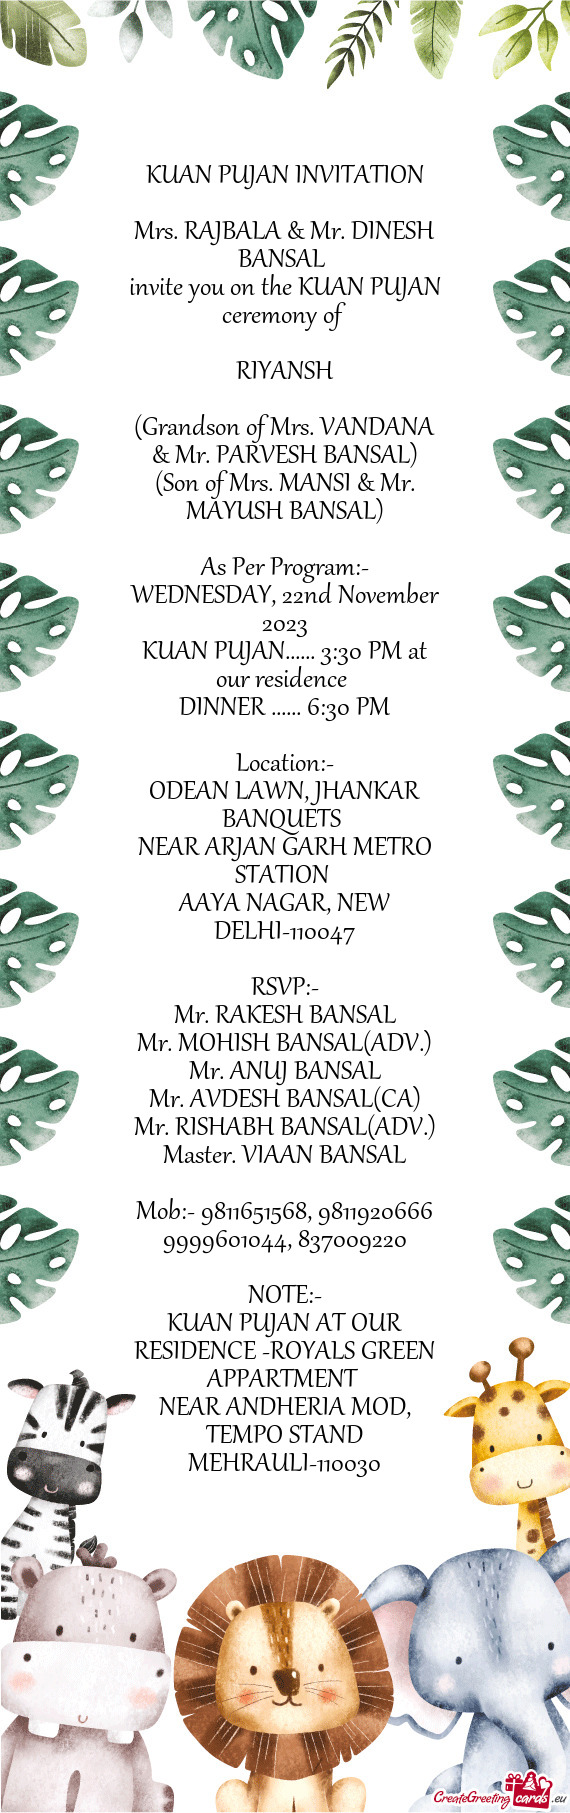 Invite you on the KUAN PUJAN ceremony of